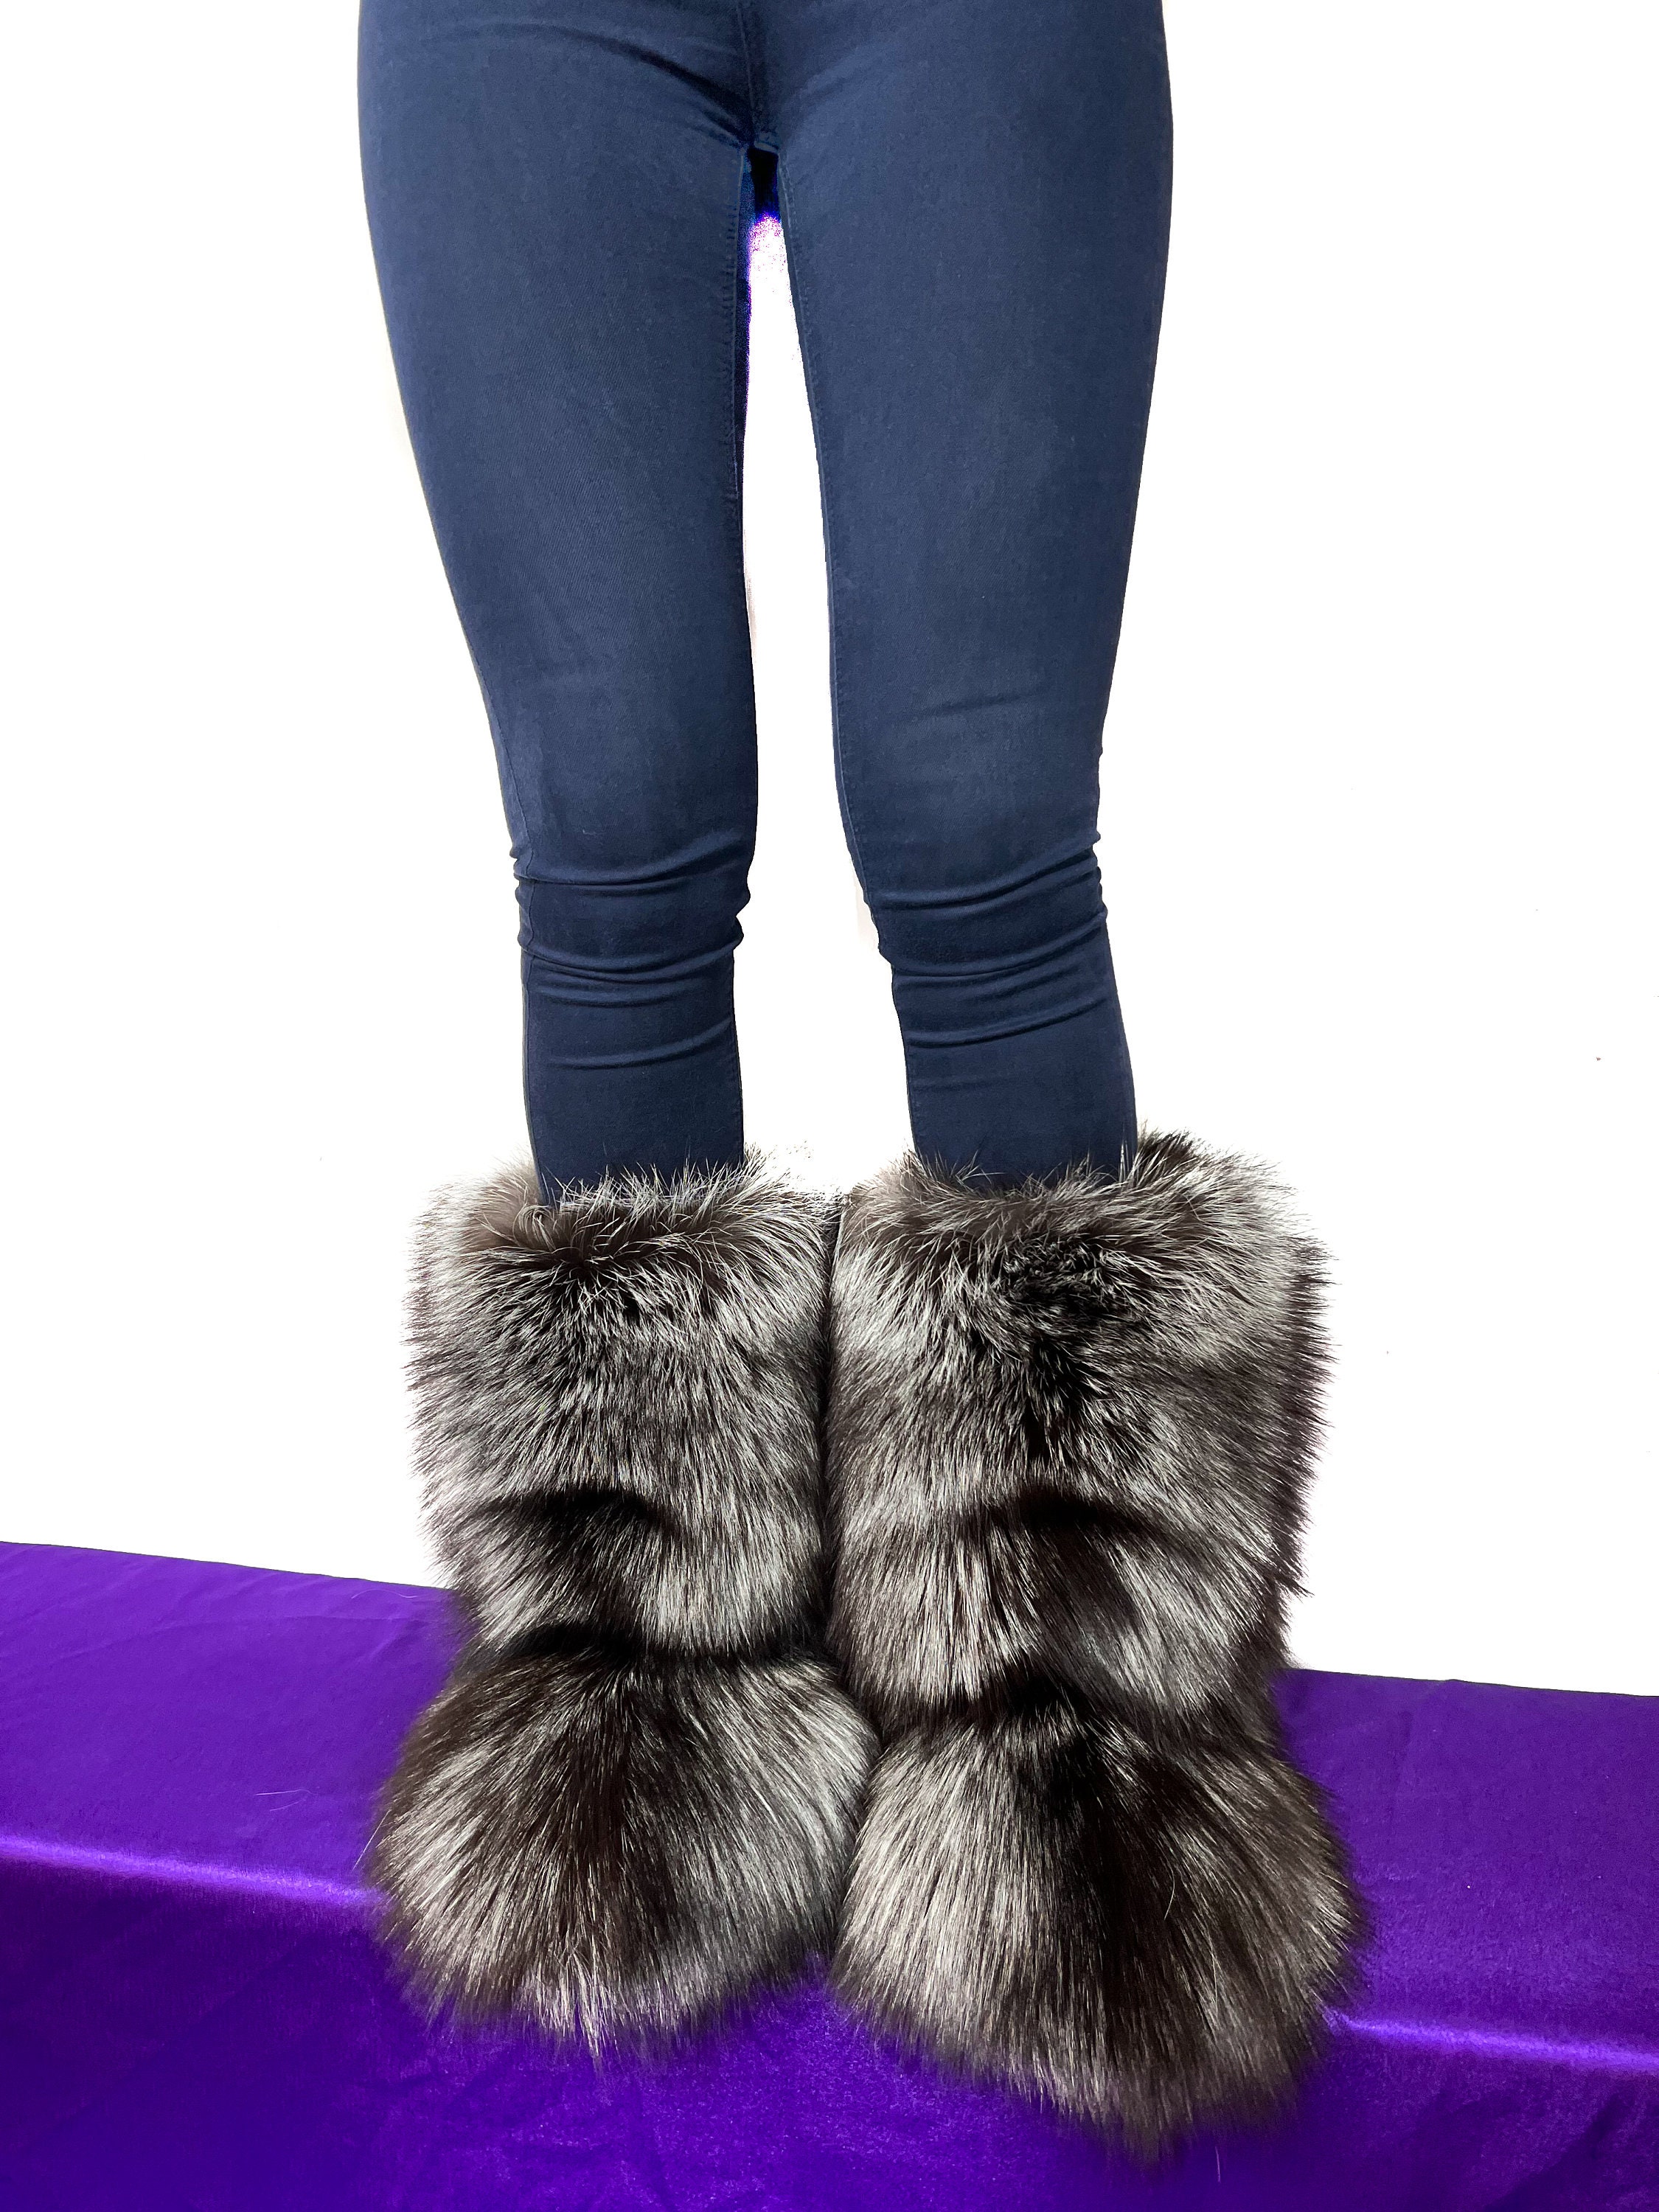 Double-sided Silver Fox Fur Boots for Indoor & Outdoor Natural Colors Fur  Shoes All Inside Lined in Fur - Etsy